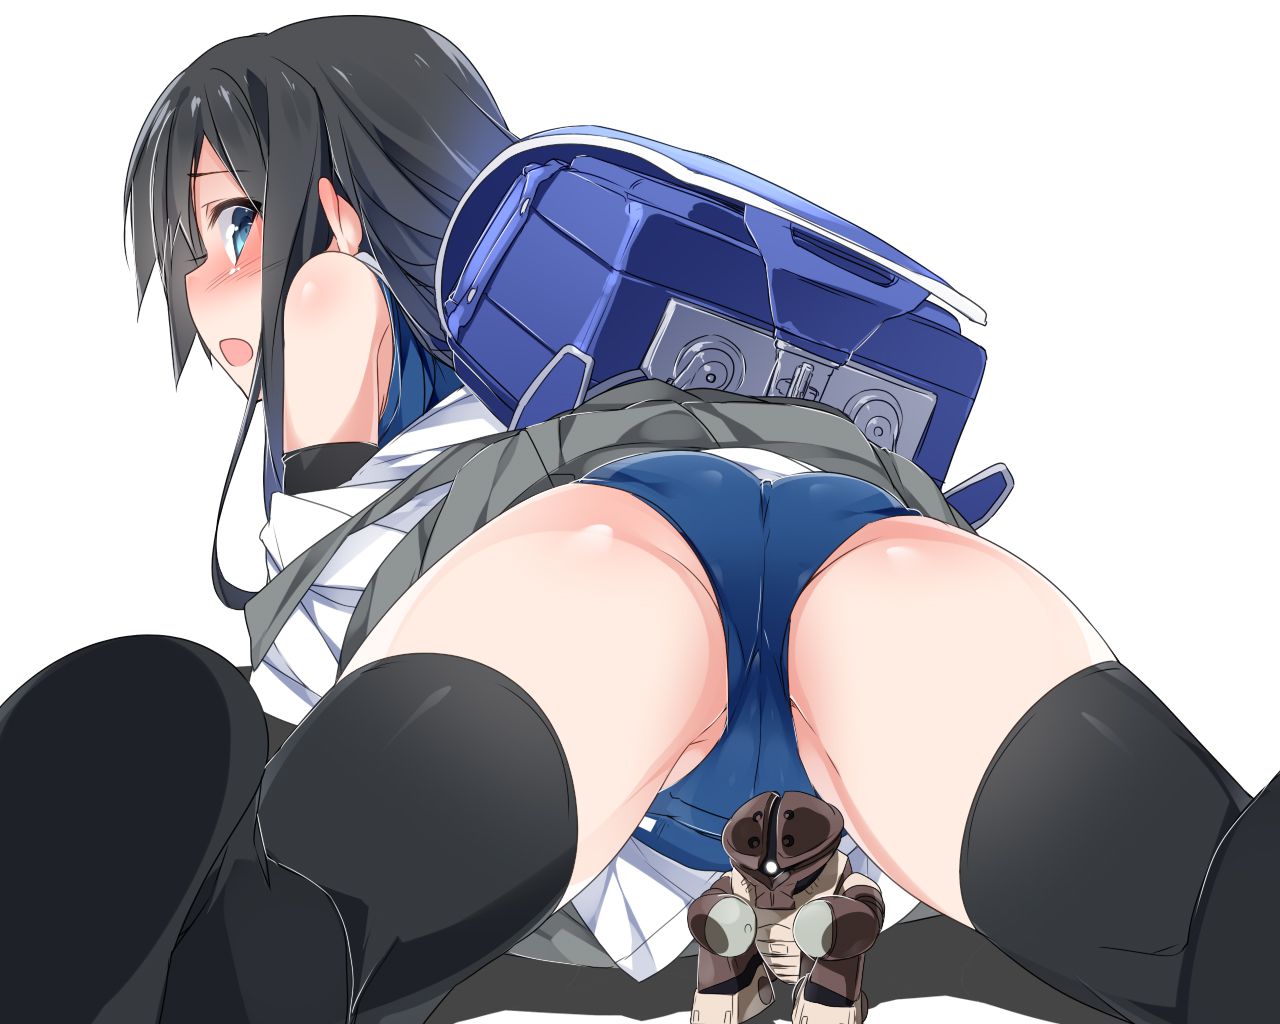 [Secondary, ZIP] pretty serious ship it together images of asashio 100 52